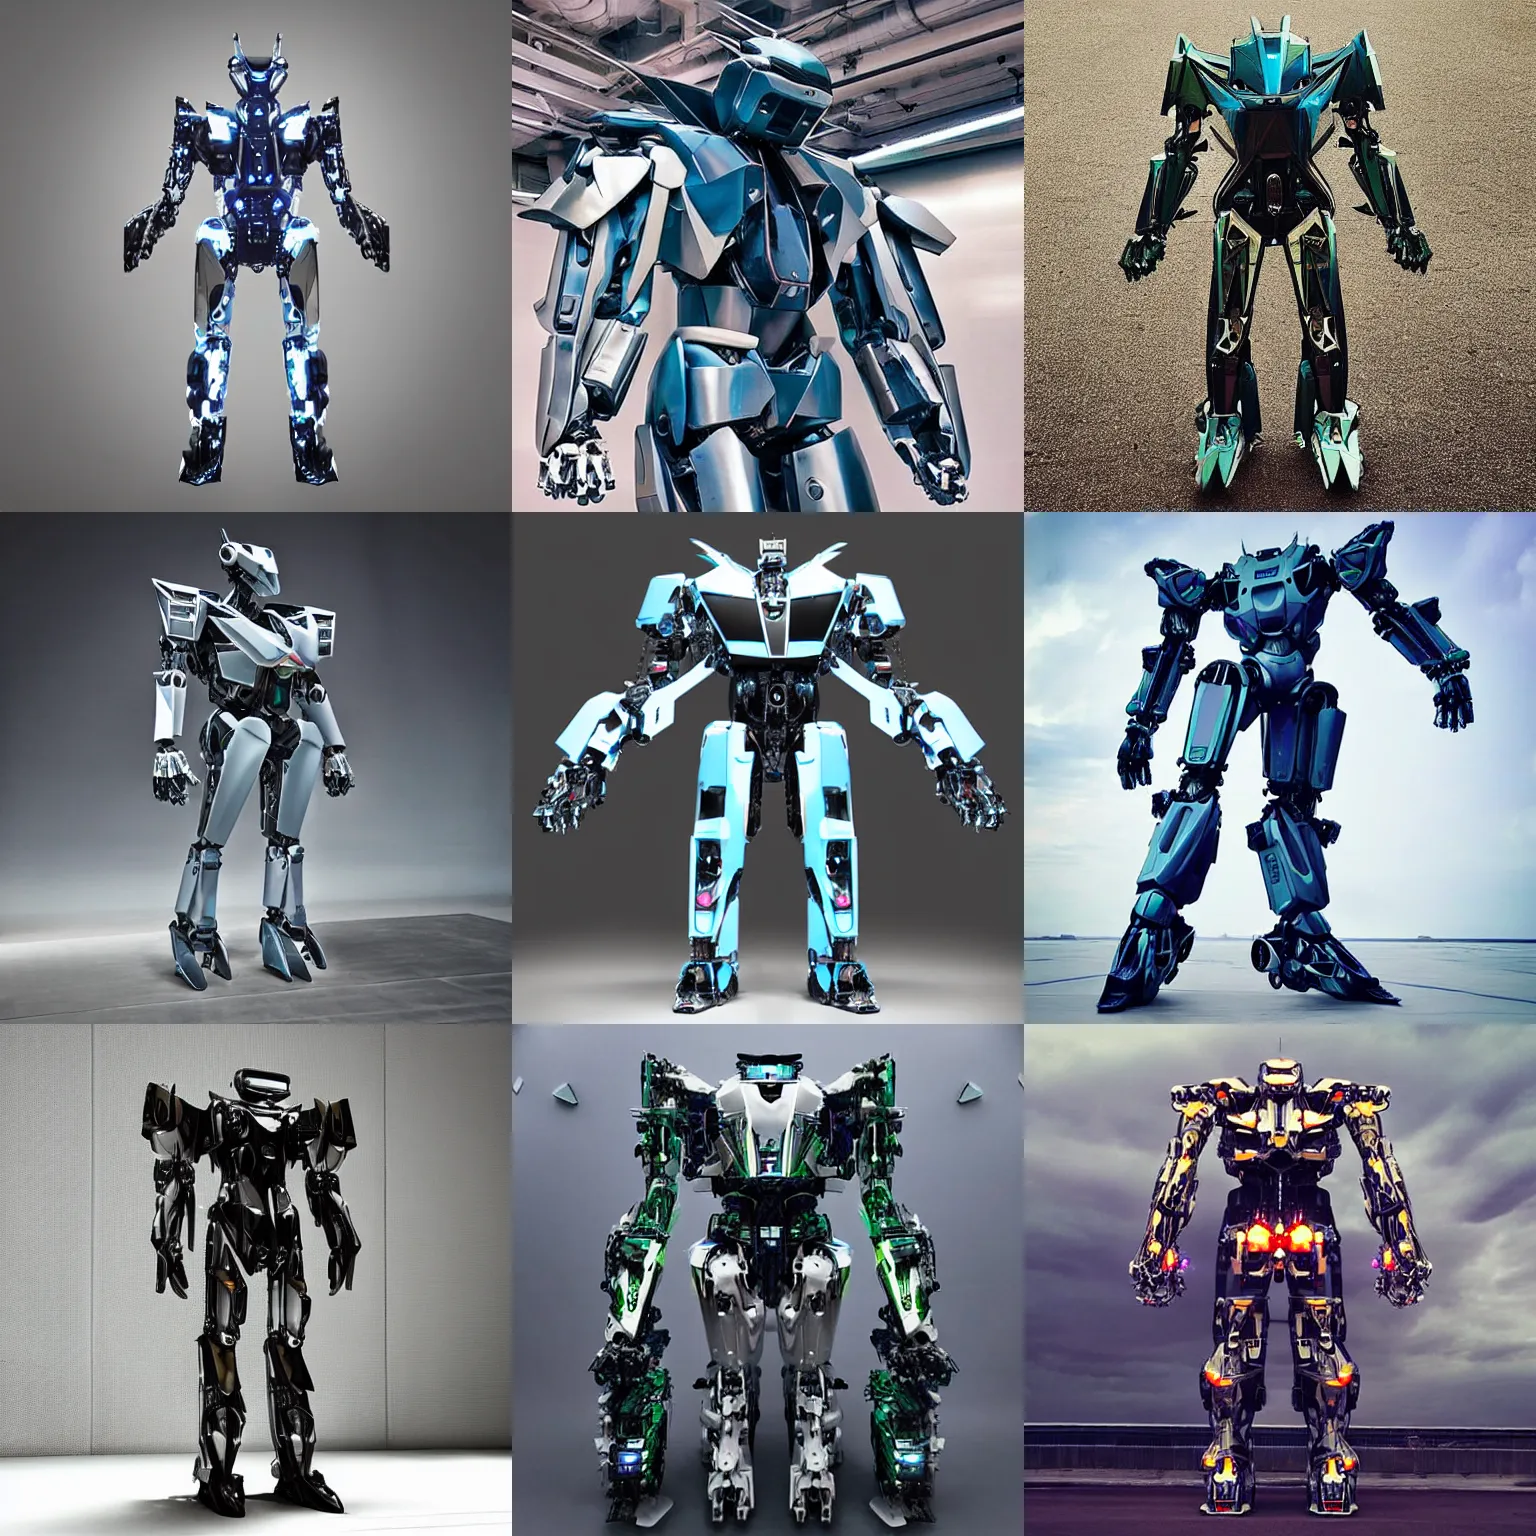 Prompt: “Mecha suit made by Lamborghini, stunning high tech, by Beeple, hyperrealistic, transformers, cinematography”